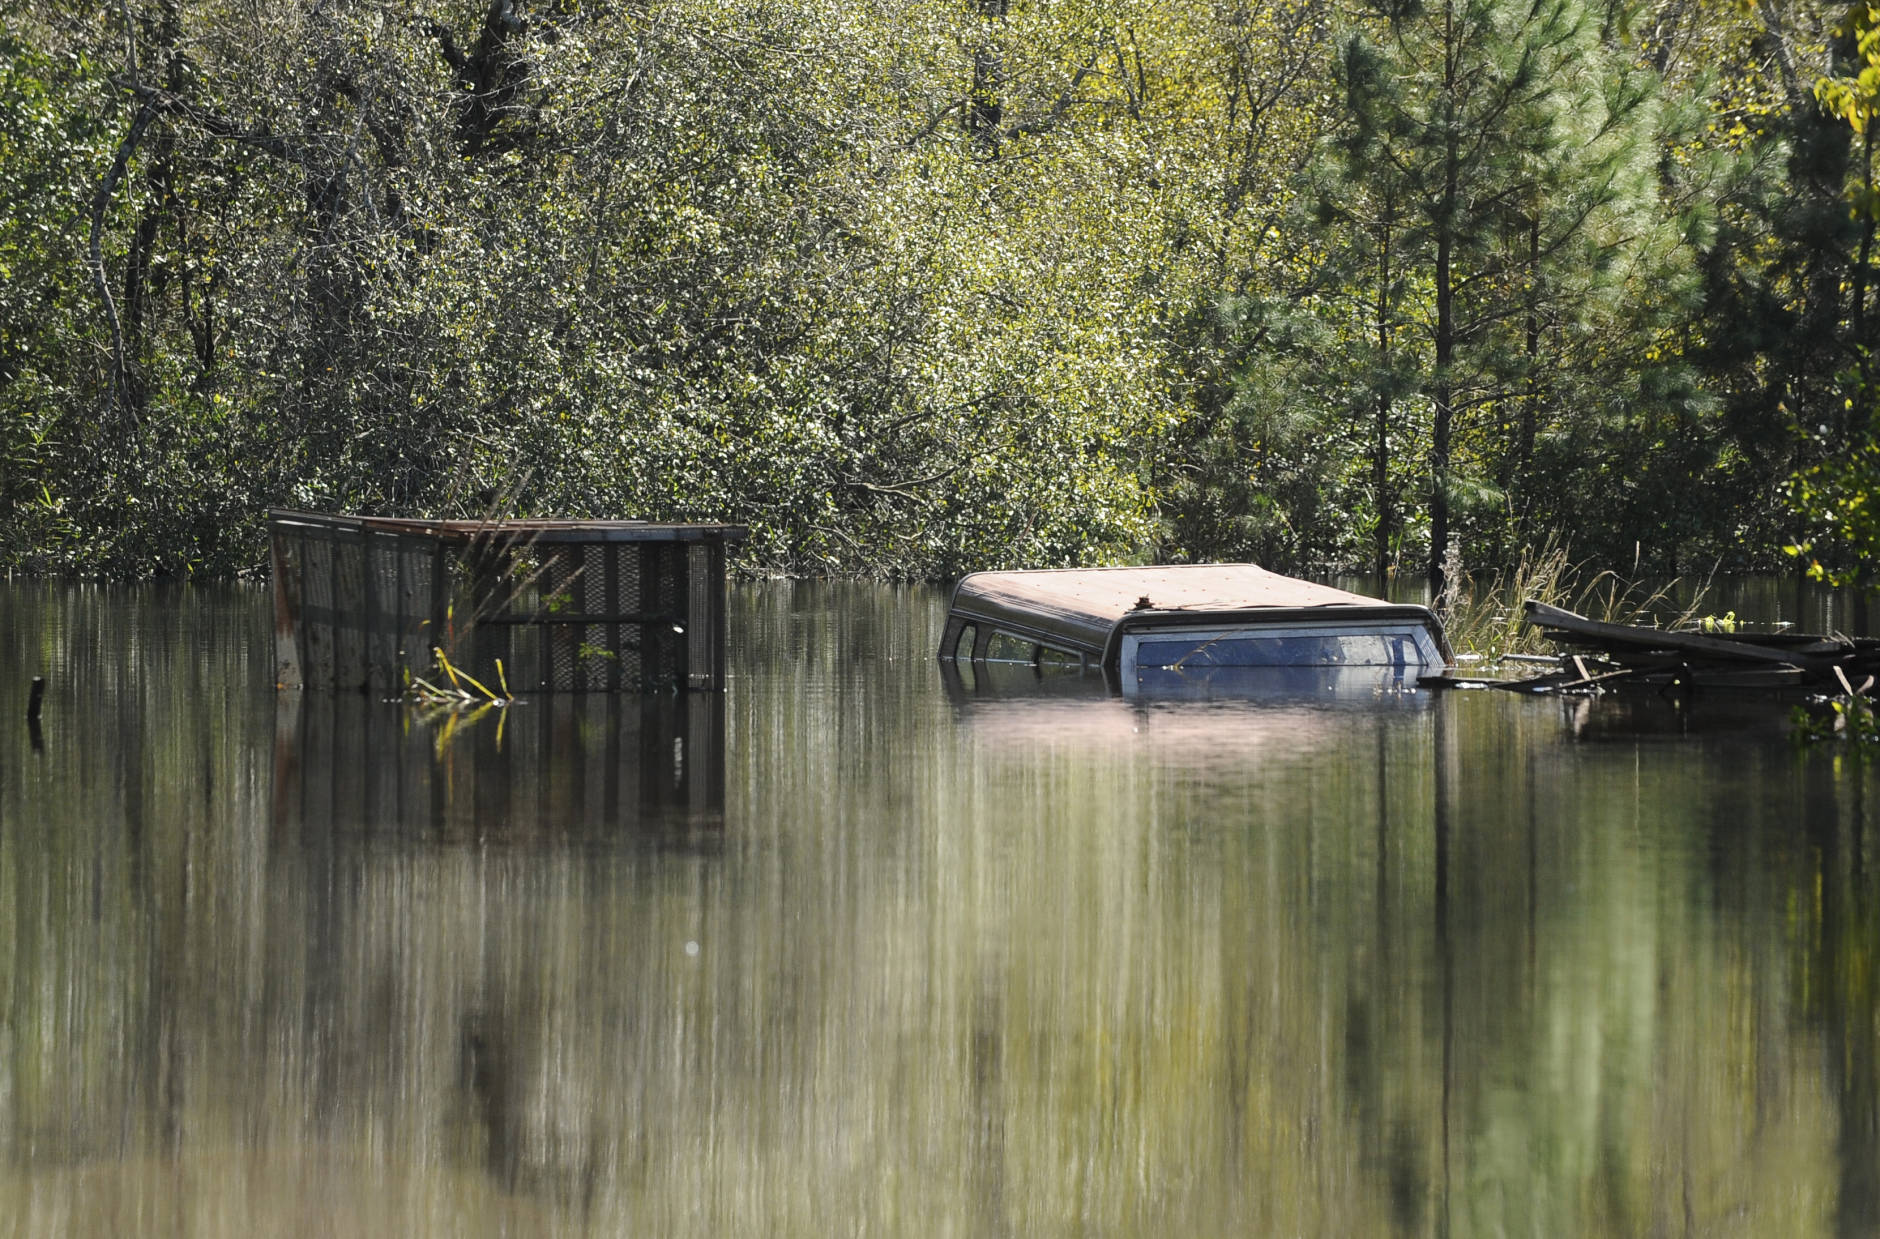 Debris and a pickup truck are submerged under floodwater on Tuesday, Oct. 11, 2016, in Nichols, S.C. About 150 people were rescued by boats from flooding in the riverside village of Nichols on Monday. (AP Photo/Rainier Ehrhardt)